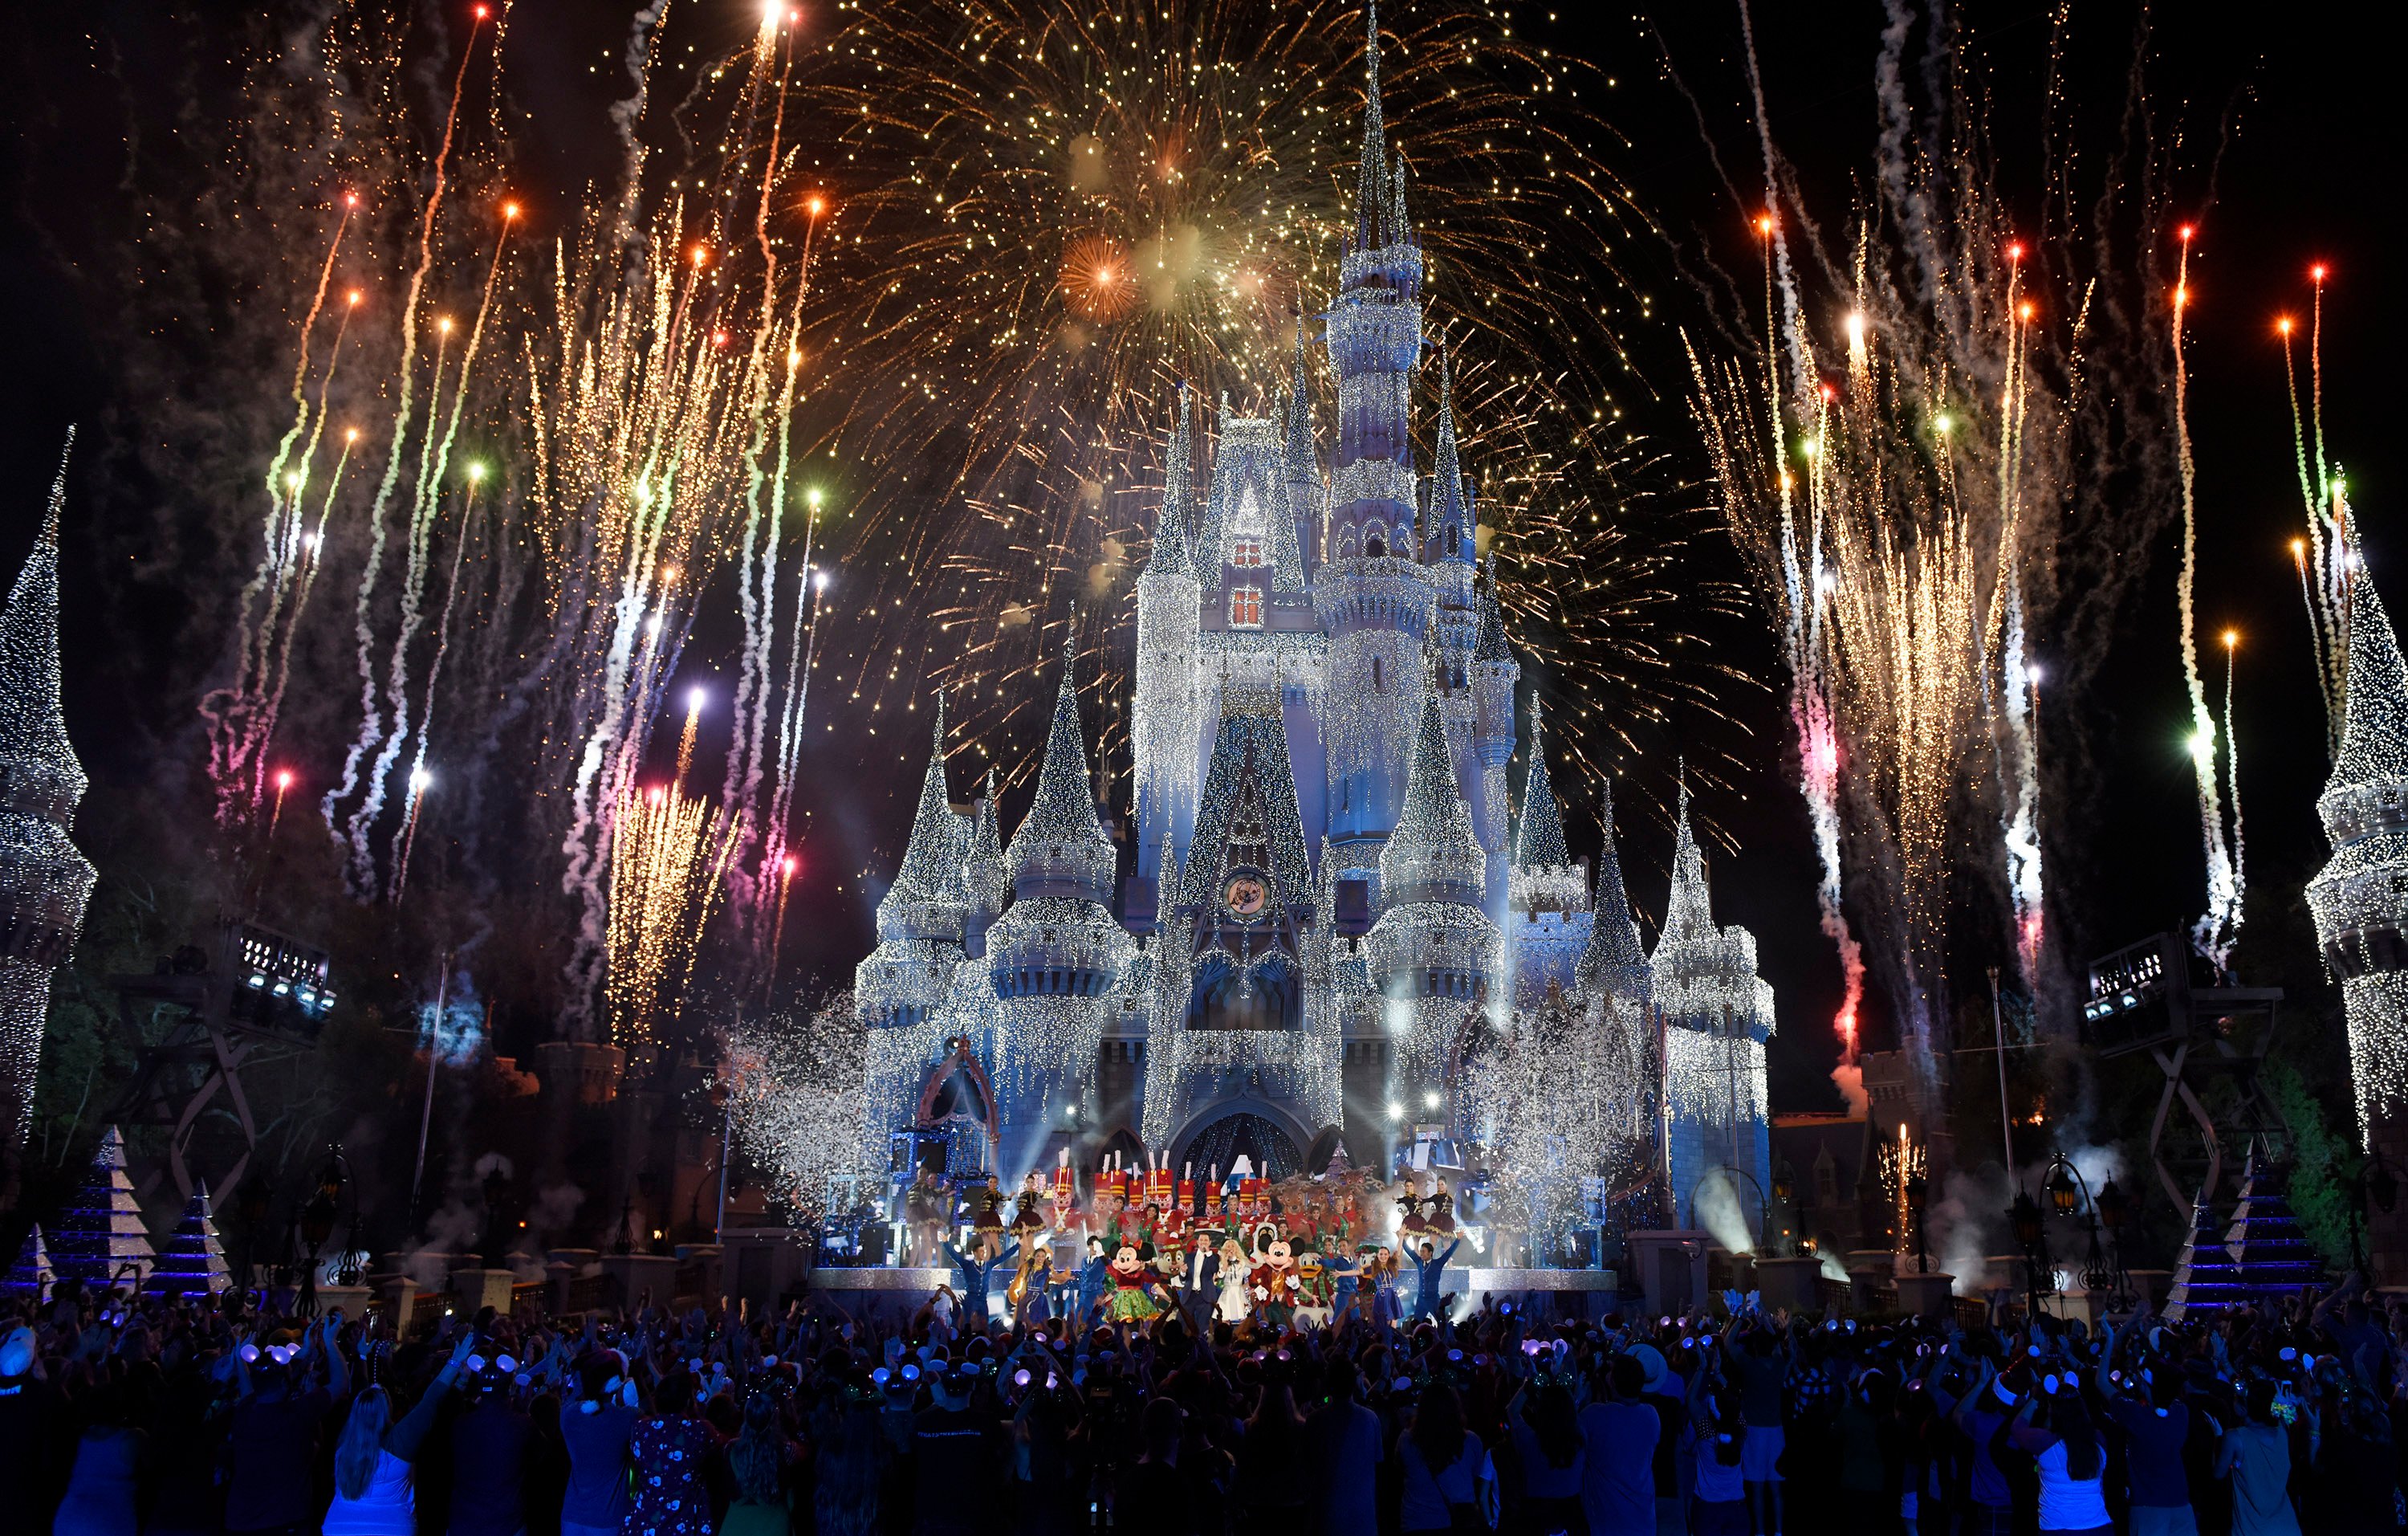 A Disney castle with fireworks